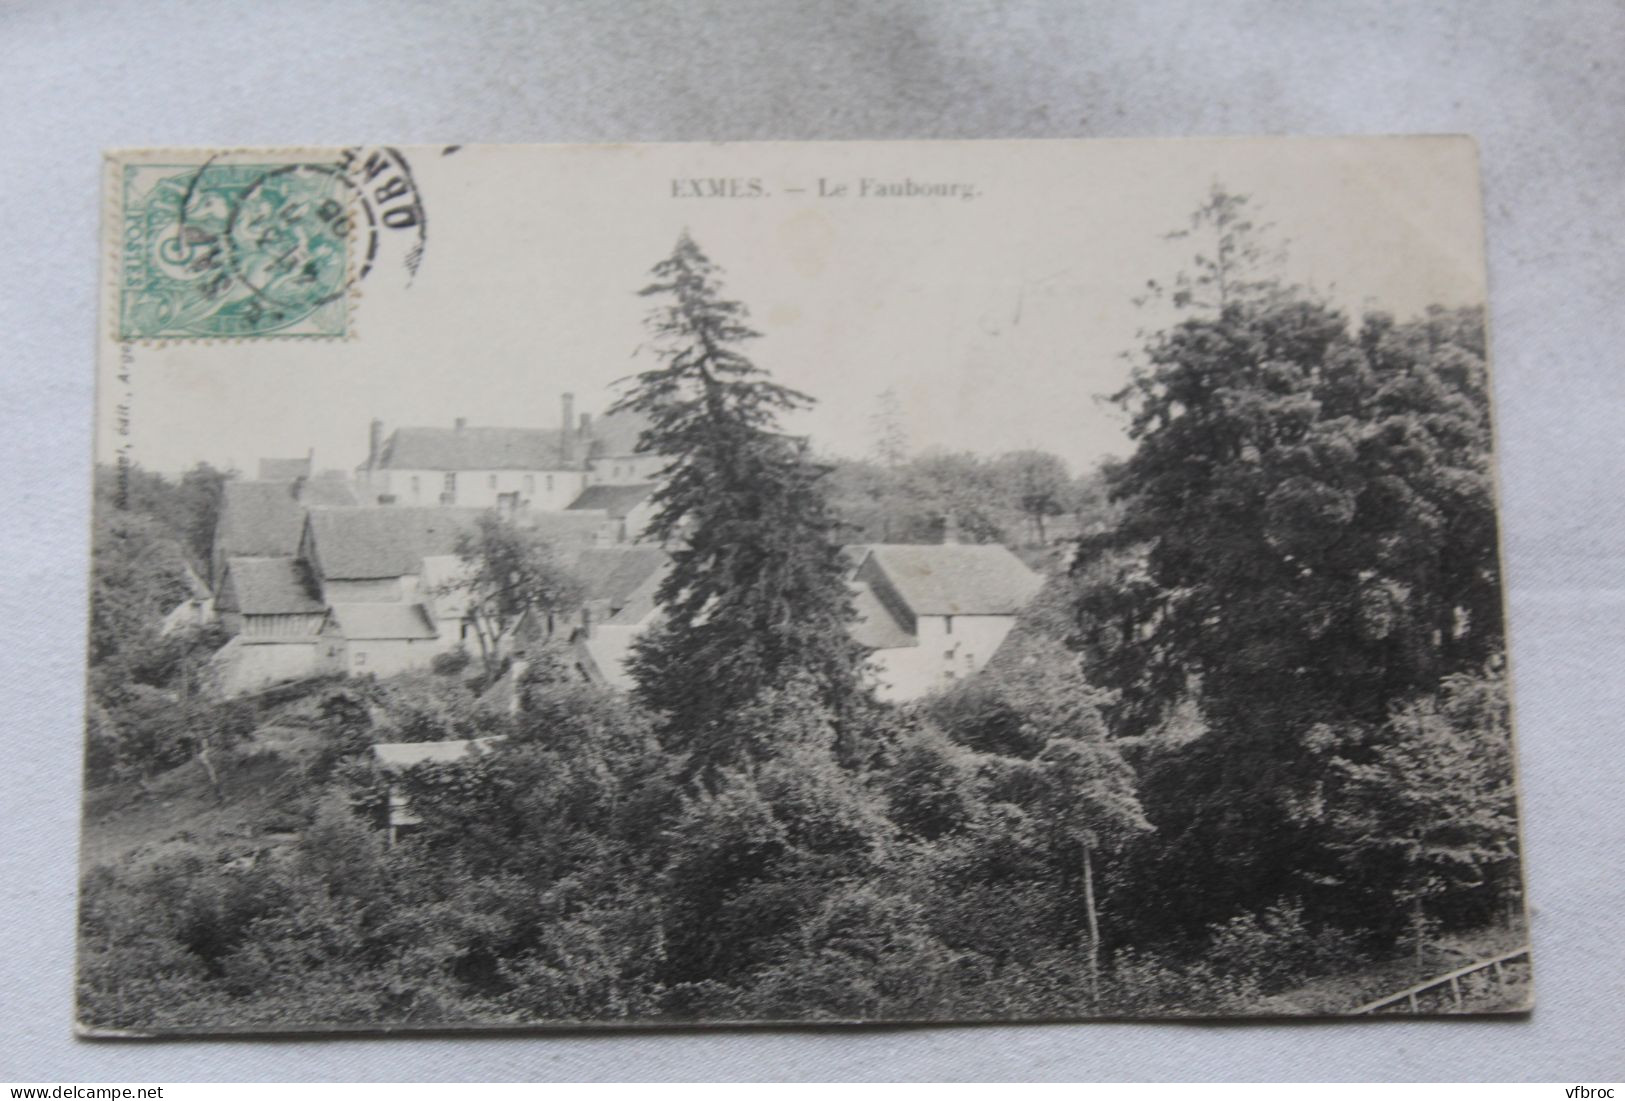 Cpa 1905, Exmes, Le Faubourg, Orne 61 - Exmes